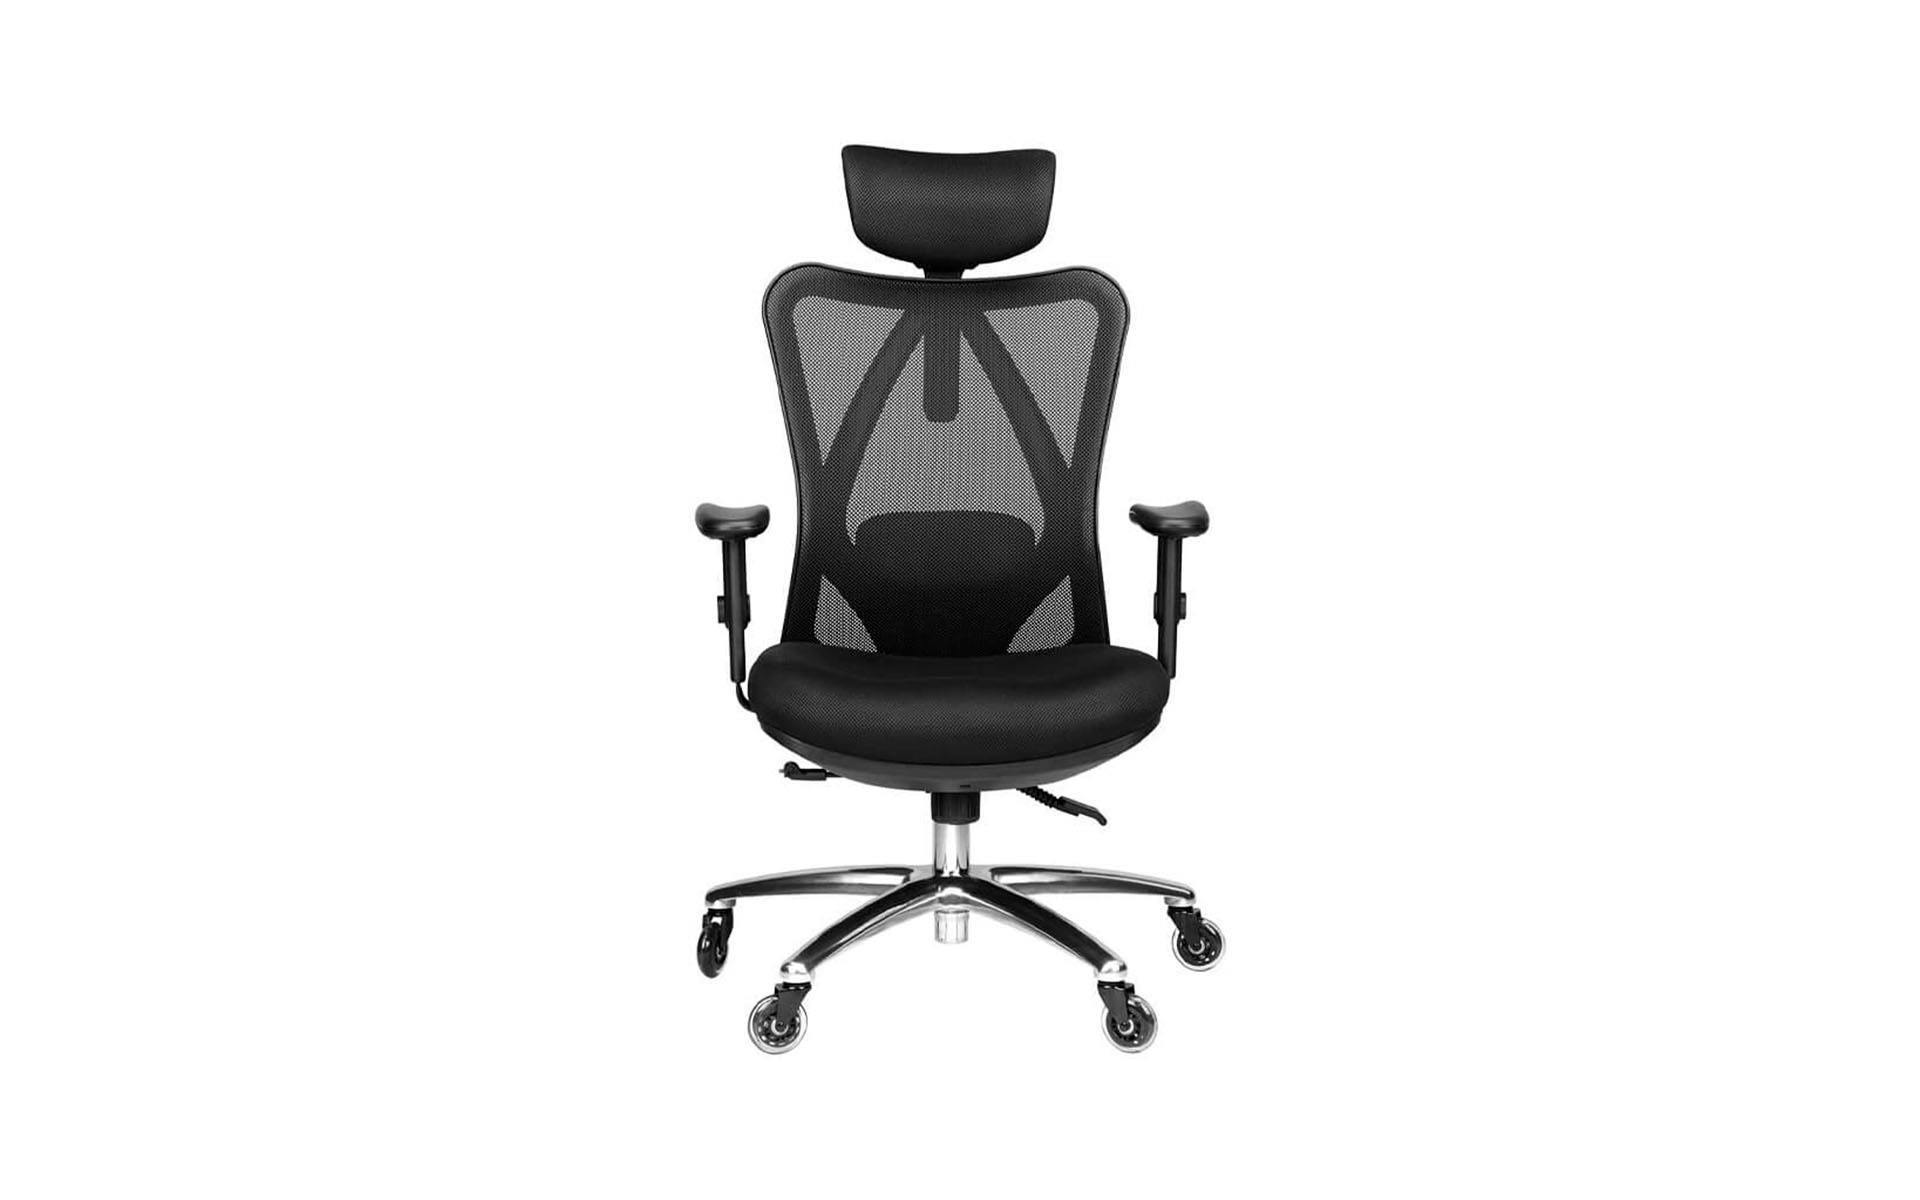 Gray and black gaming chair in a classic "Racing" shape.